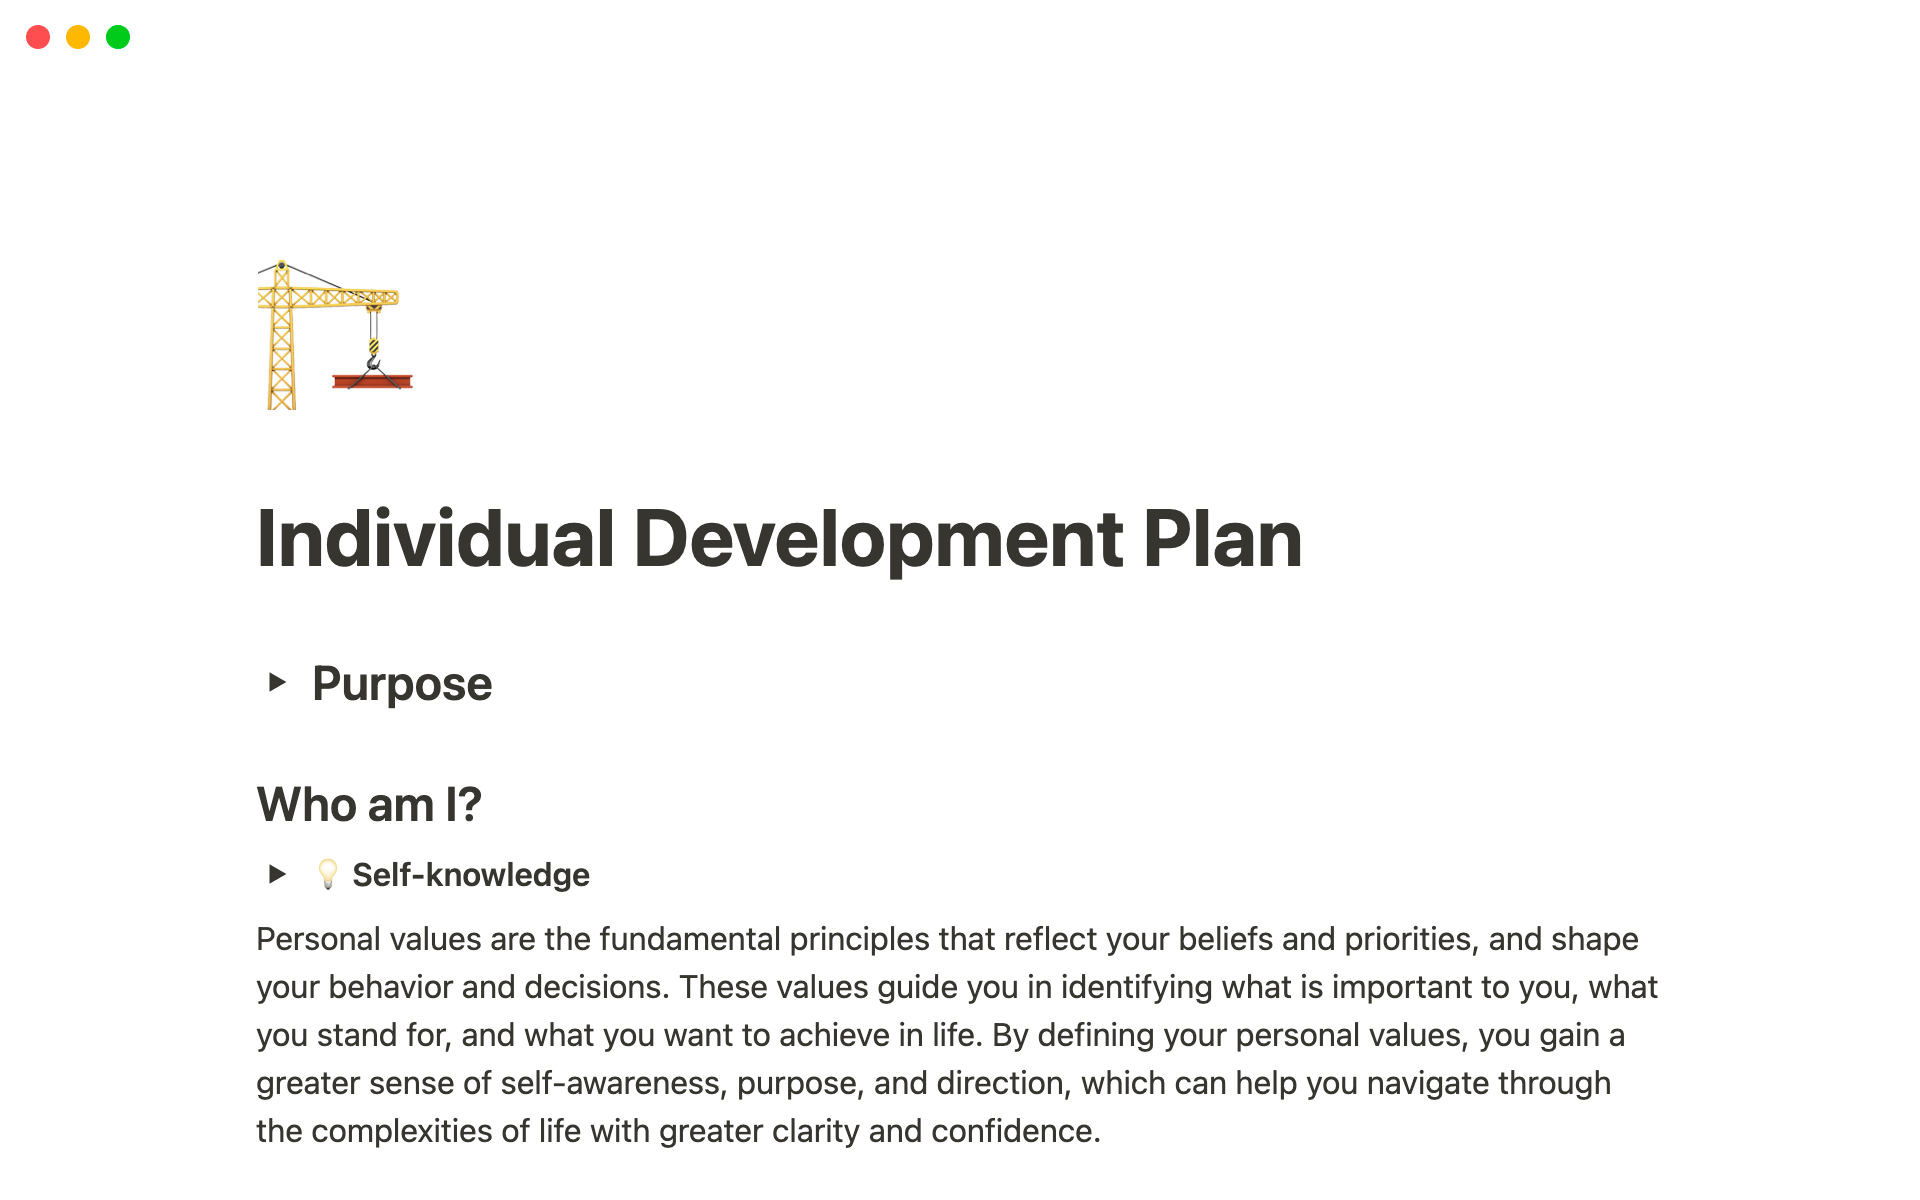 The aim of an Individual Development Plan (IDP) is to establish short-term, medium-term, and long-term goals that can be personal and professional in nature.